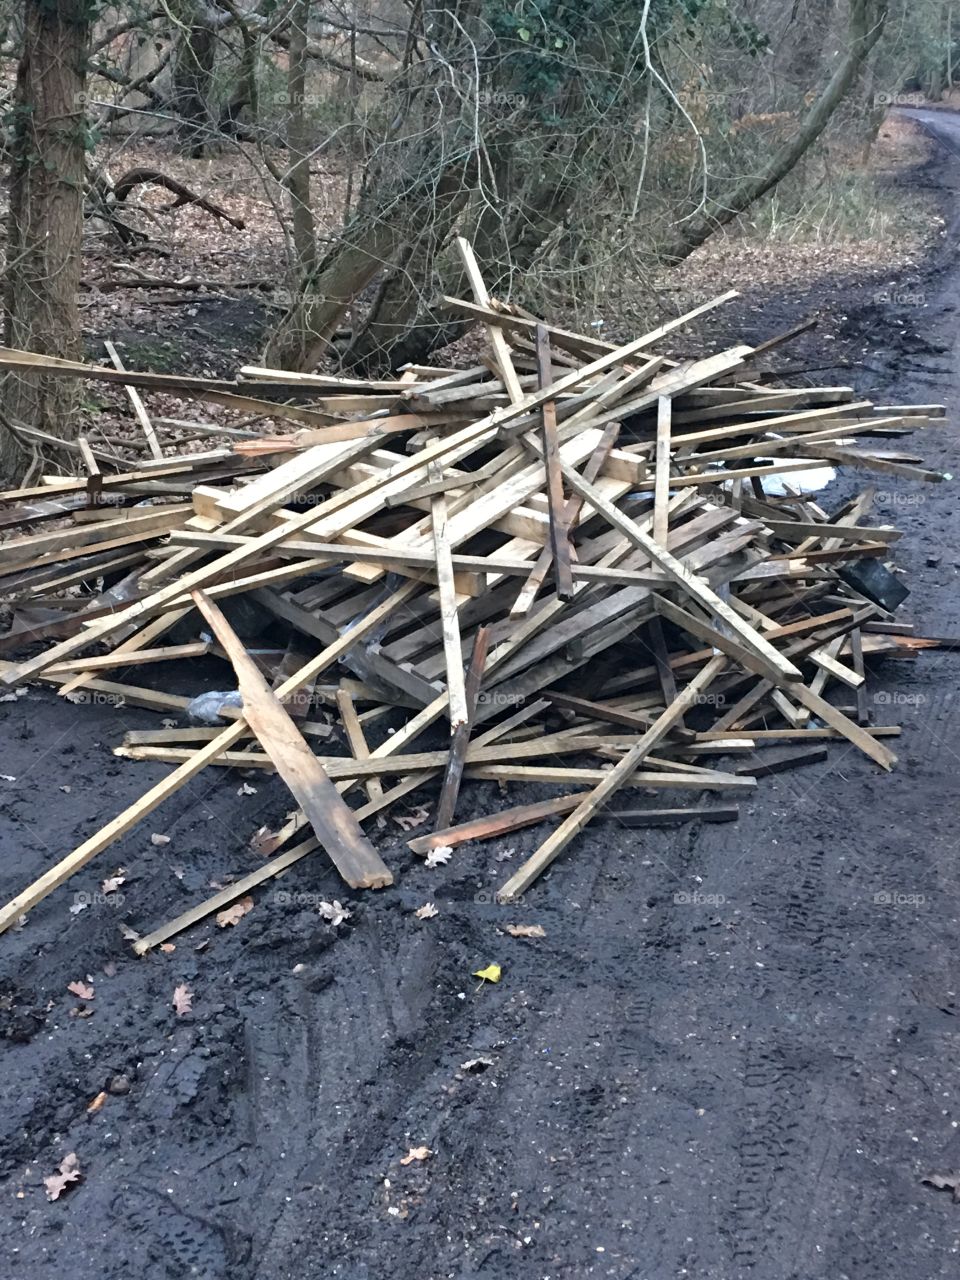 Flytip cleared 